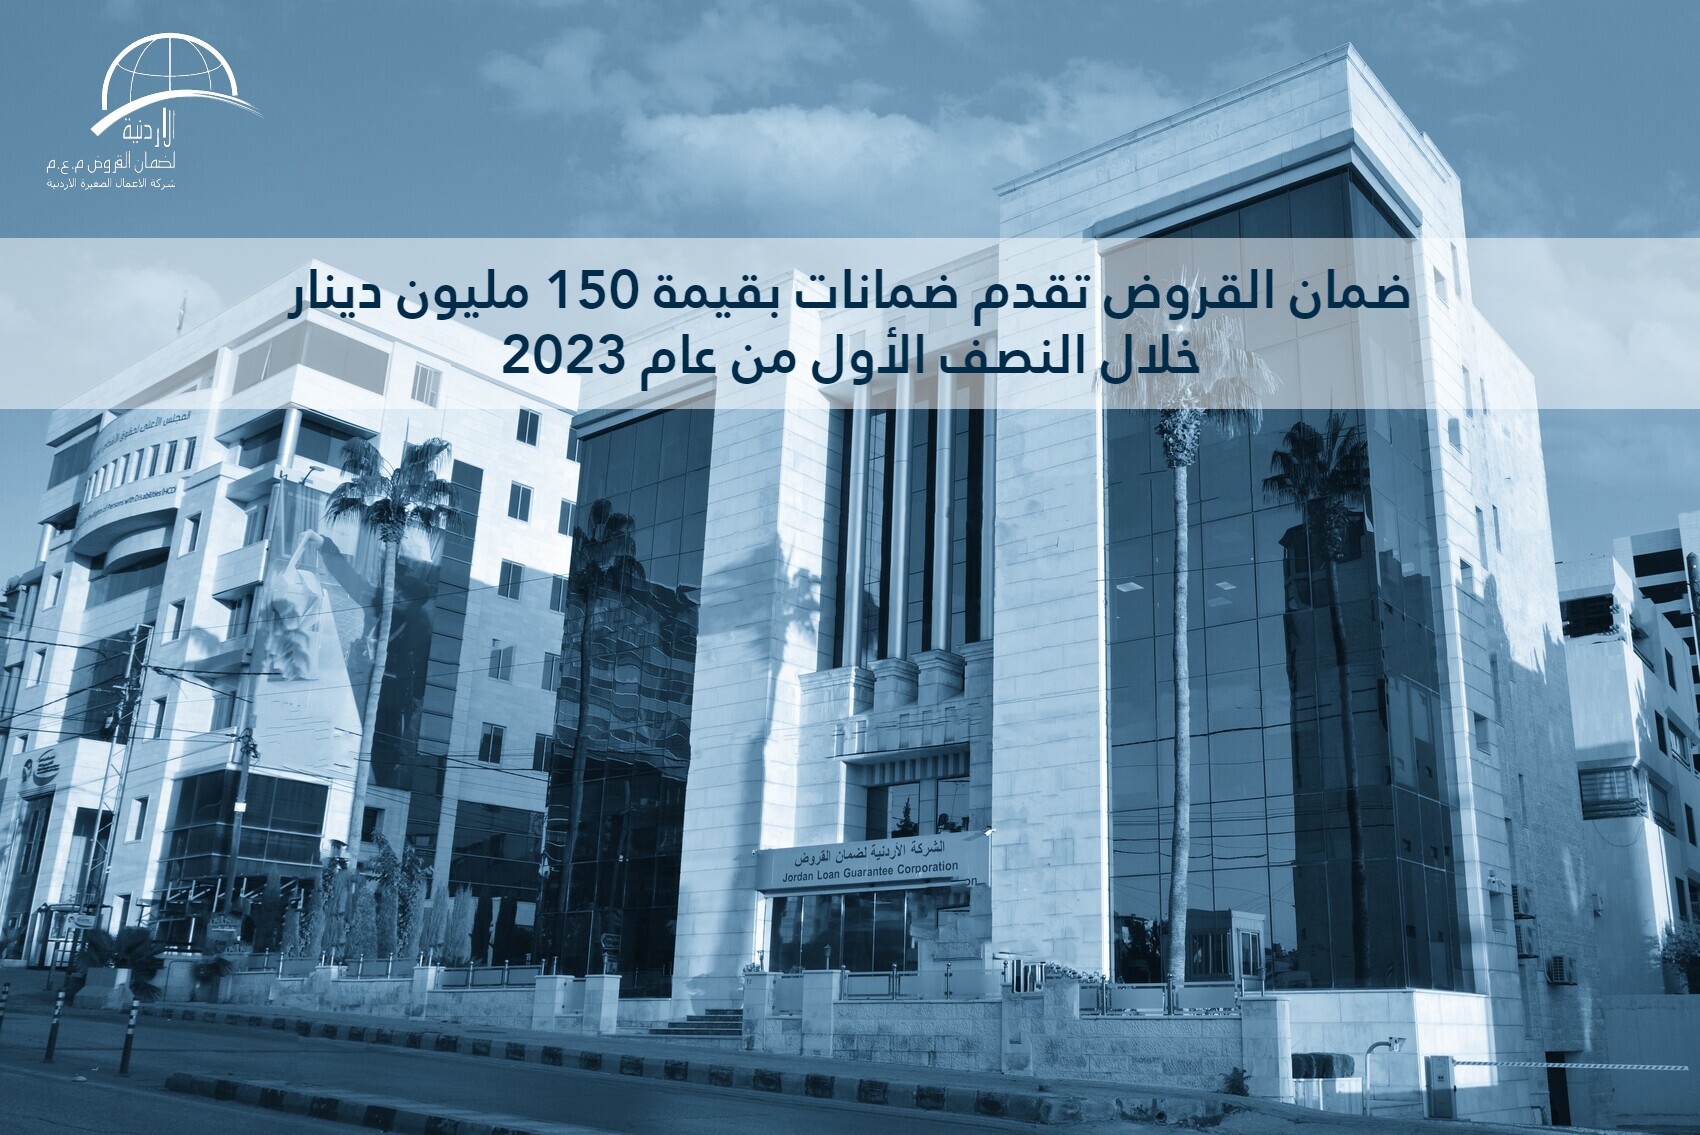 JLGC provides guarantees worth JD 150 million during the first half of 2023